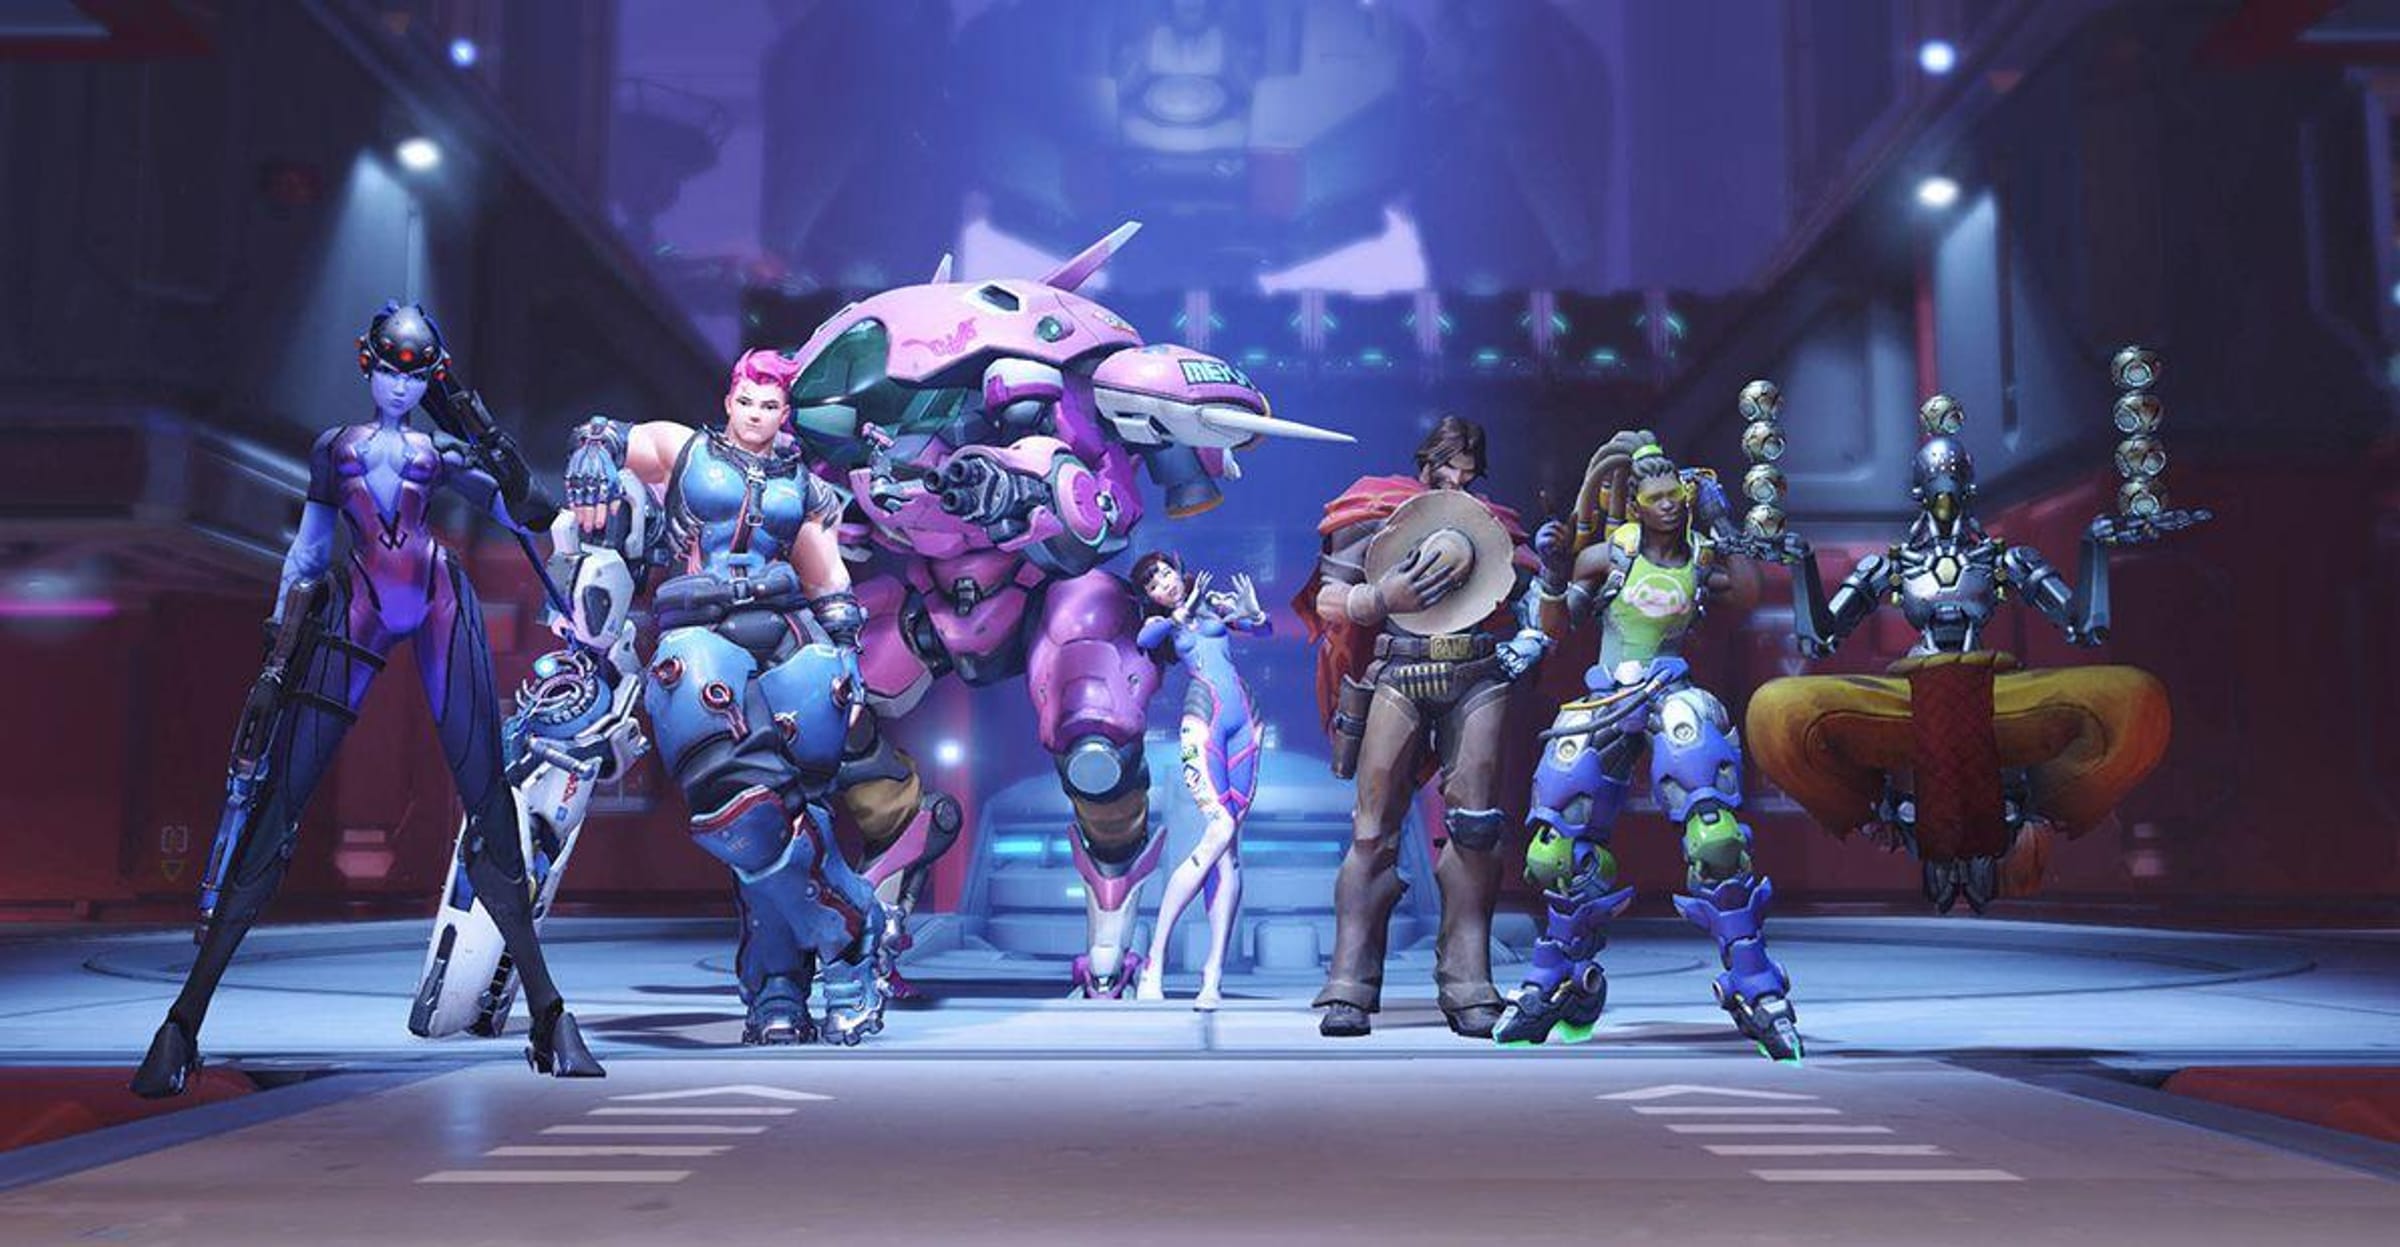 JoJo's Bizarre Adventure Meets Overwatch With These Hilarious Victory Poses